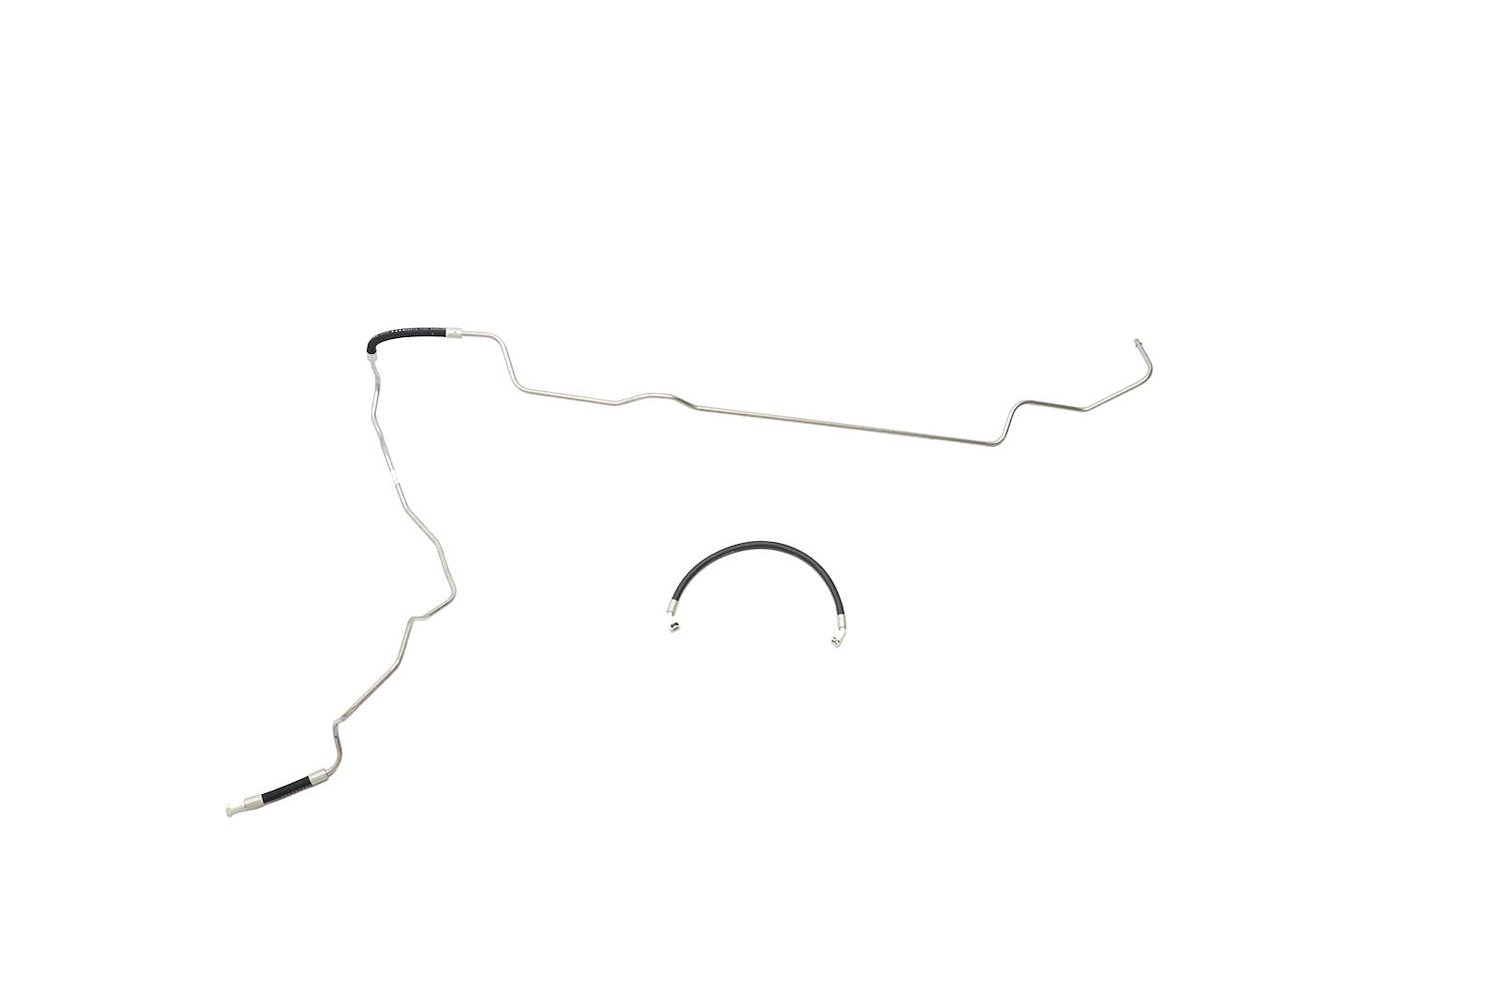 Chevy / GMC Pick Up Fuel Supply Line -2005 2006 2007